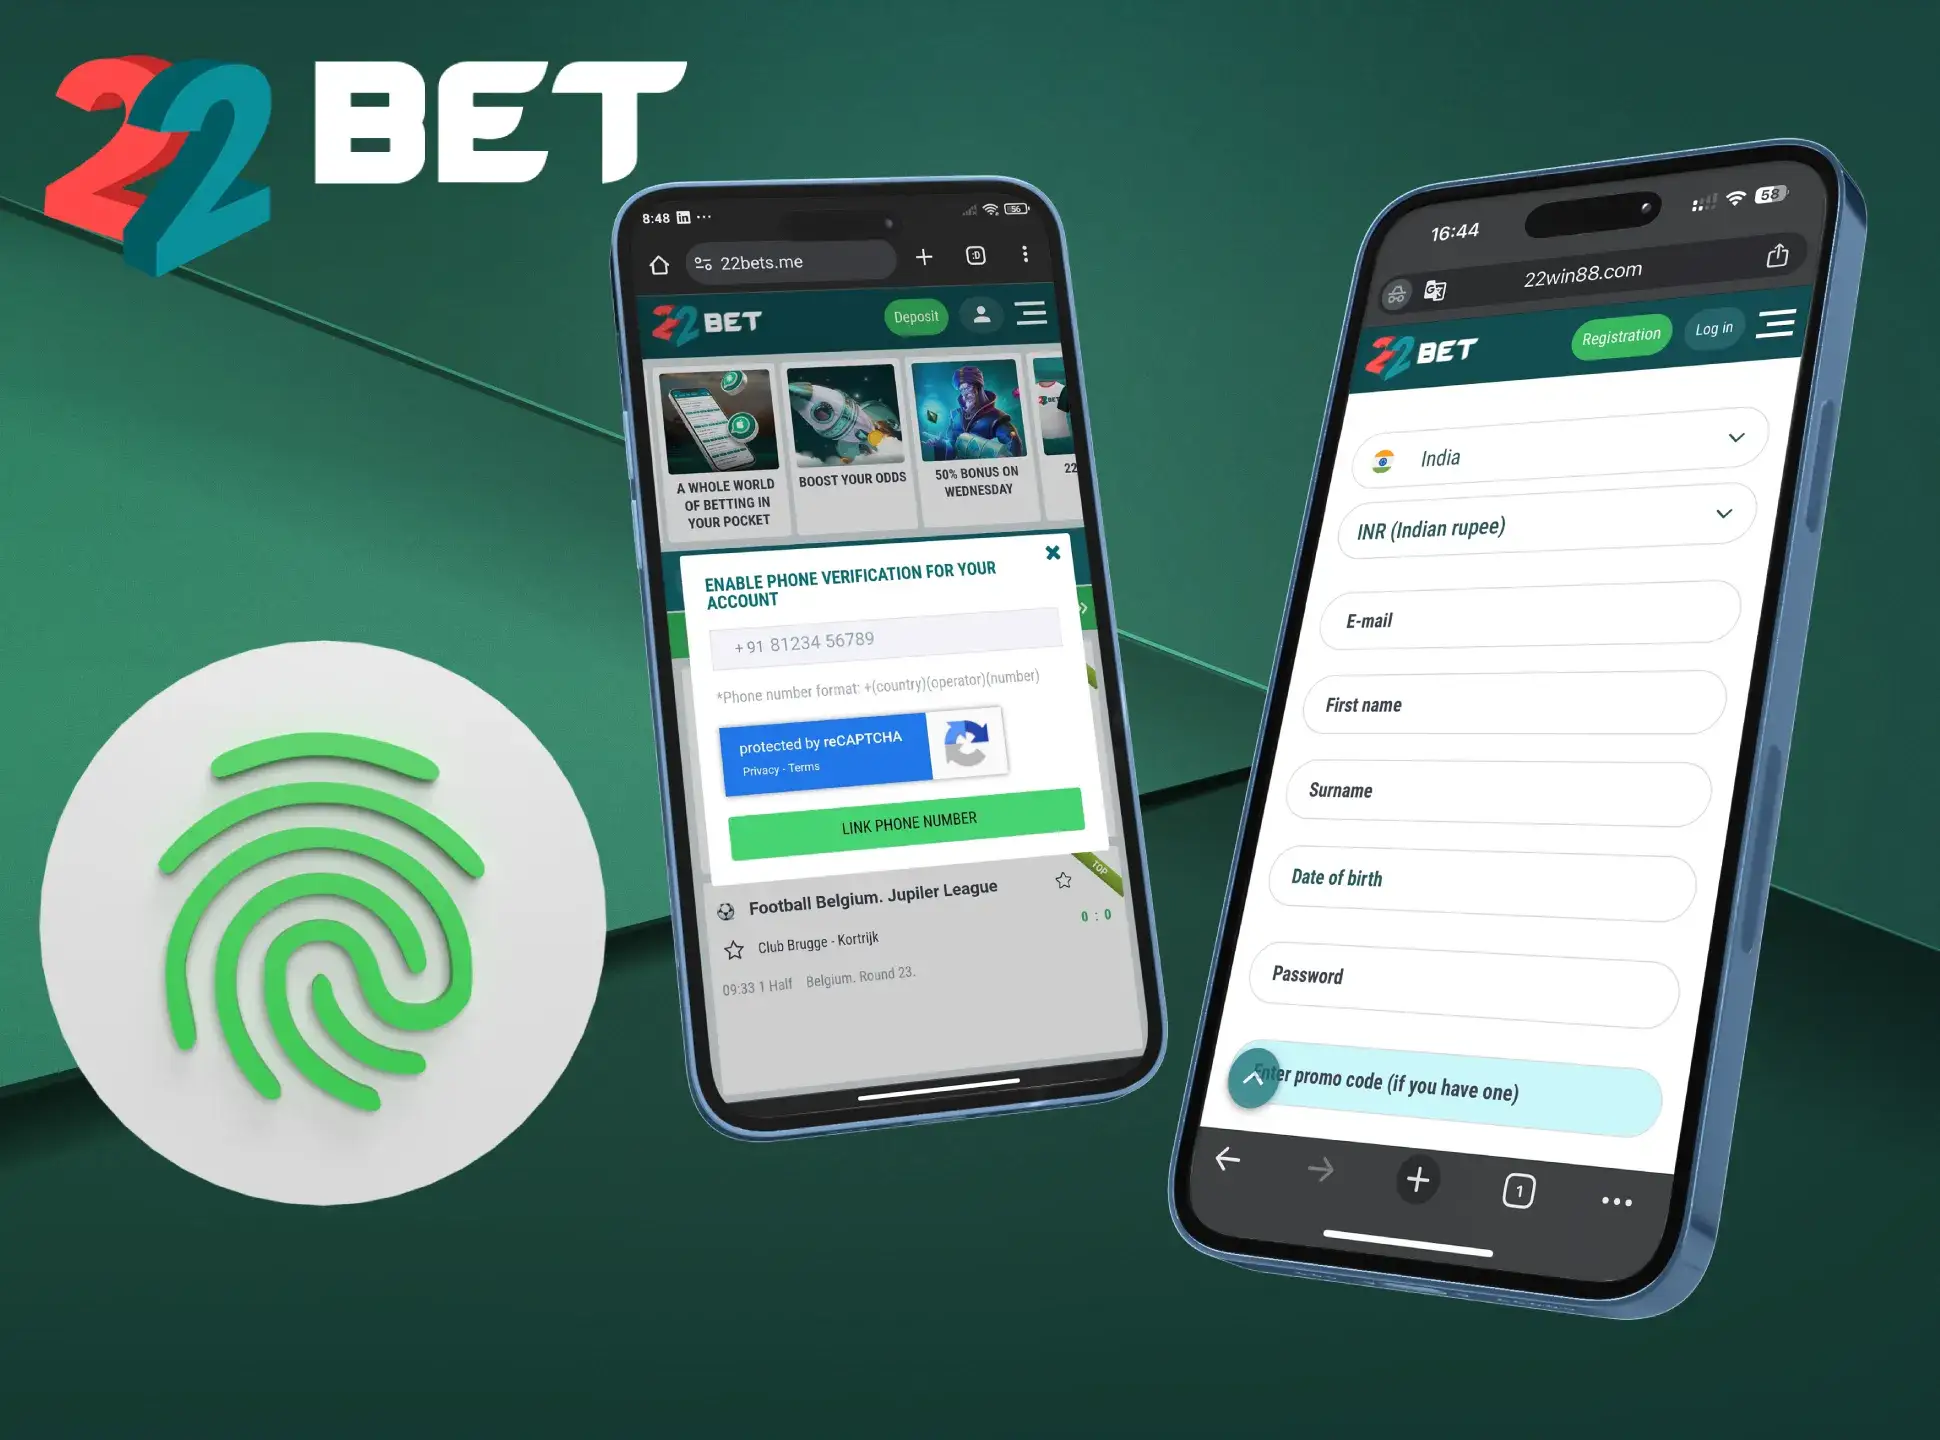 Follow the instructions to register and verify your 22Bet account.